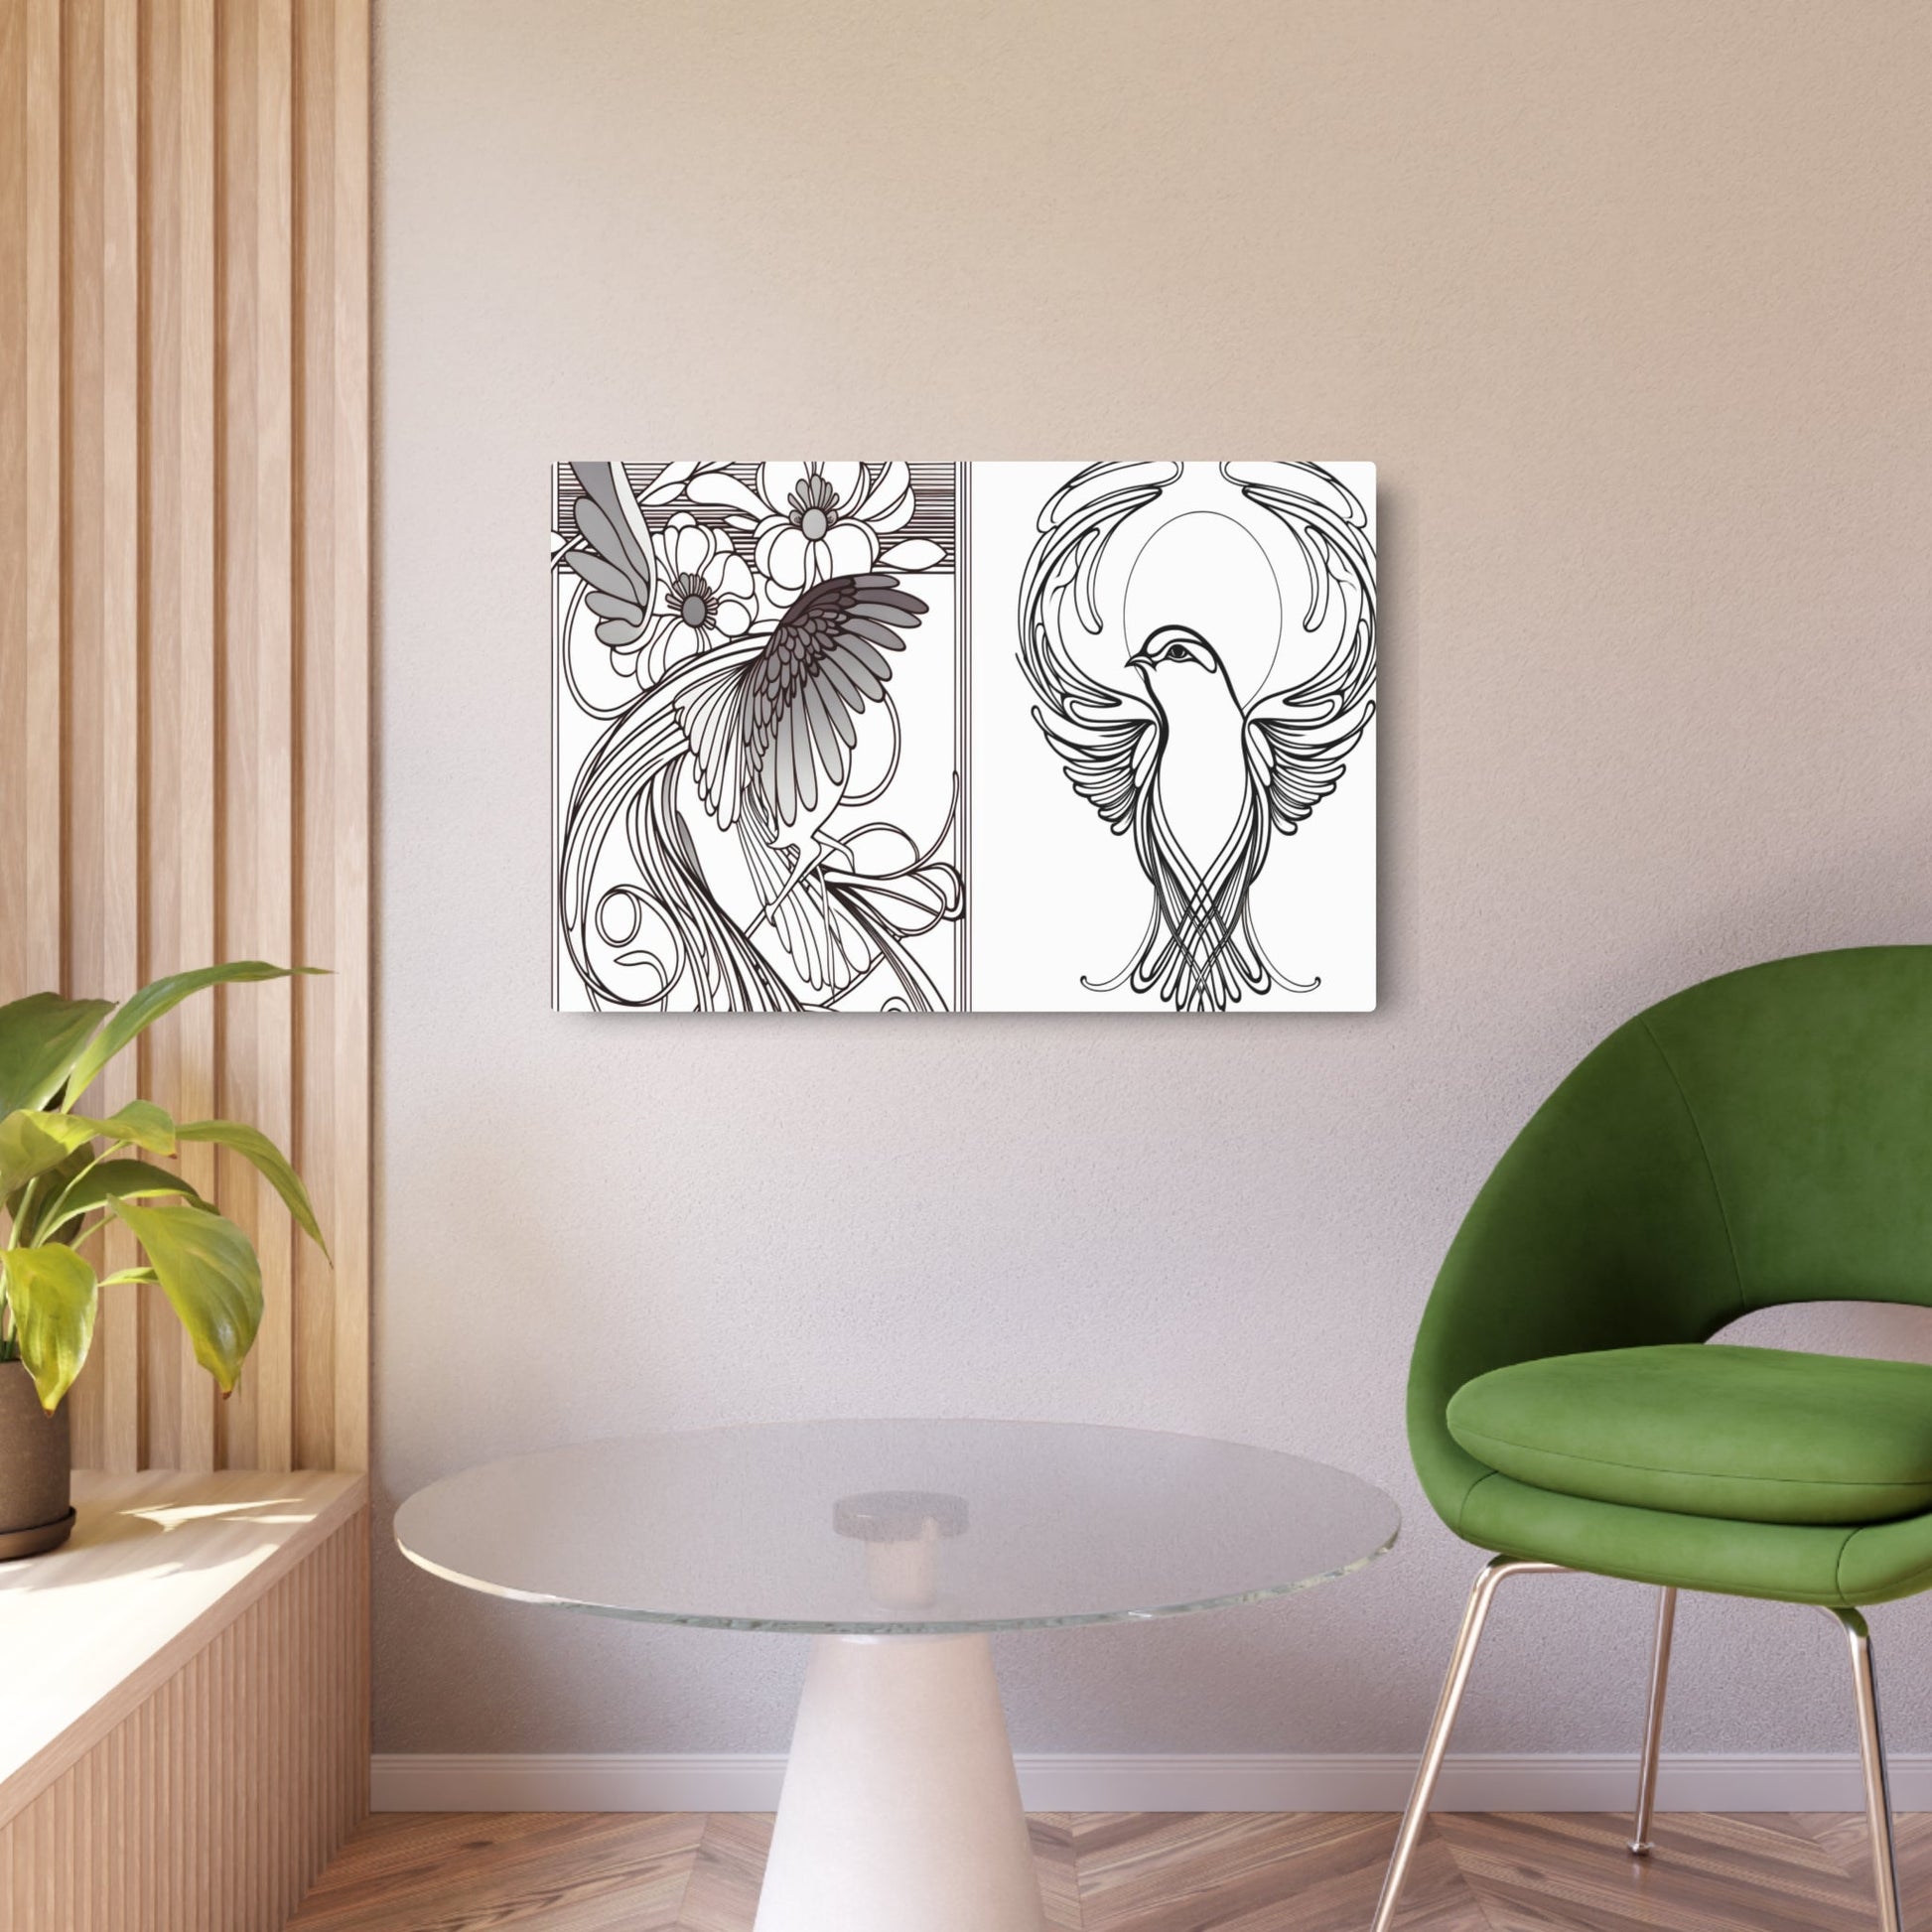 Metal Poster Art | "Art Nouveau Western Art Style - Intricate Bird and Floral Design with Organic Lines and Natural Patterns" - Metal Poster Art 36″ x 24″ (Horizontal) 0.12''